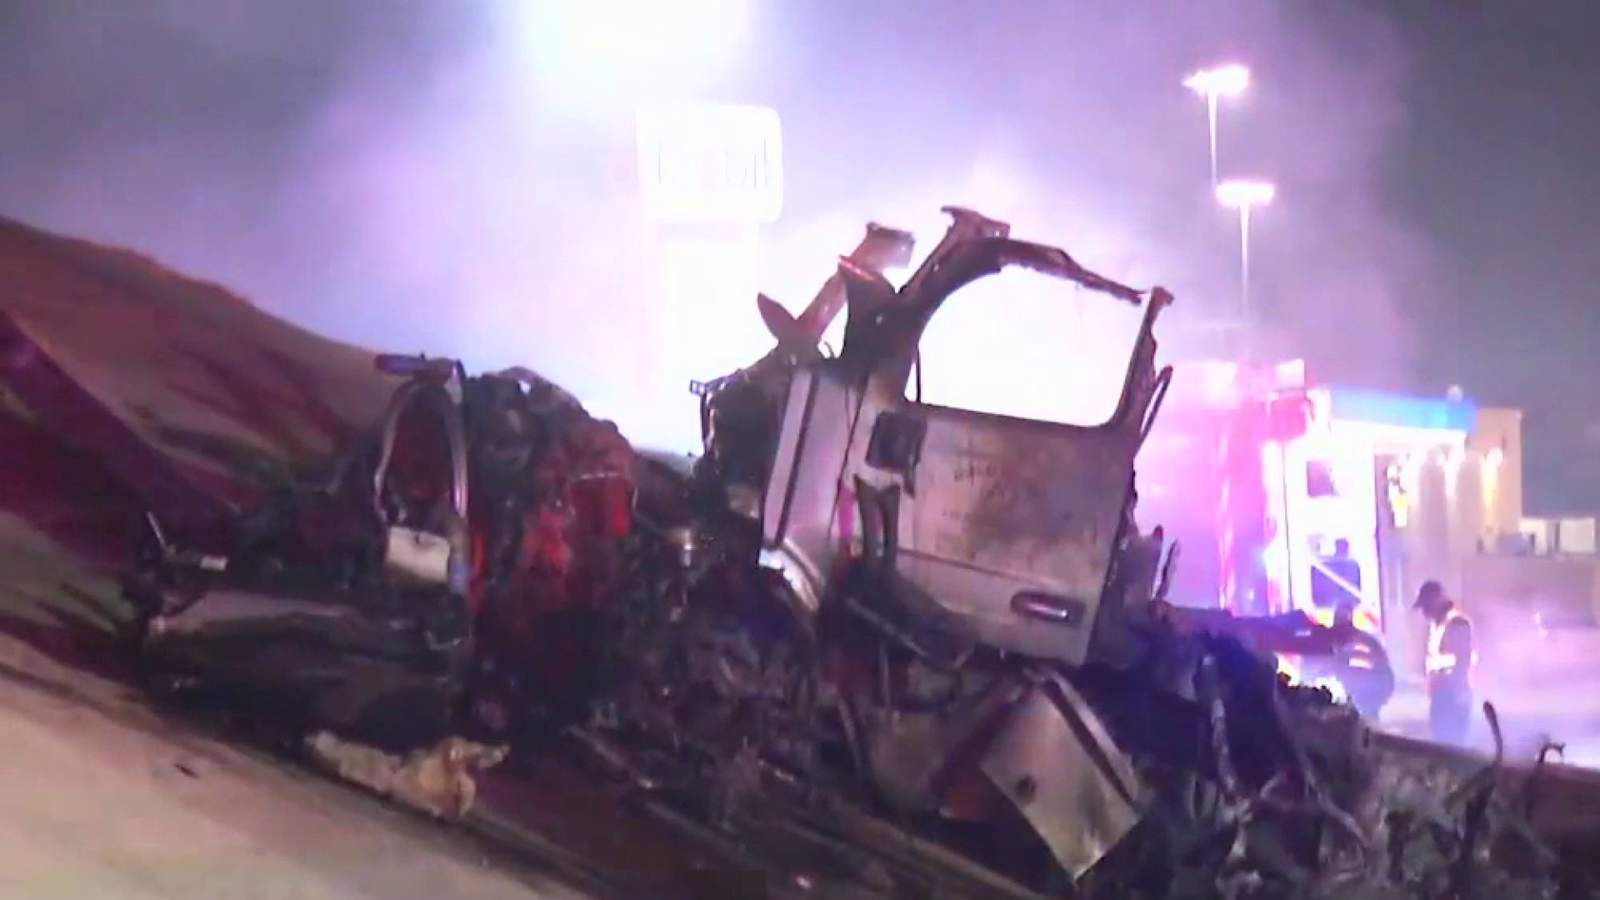 Authorities ID driver of 18-wheeler who died in fiery crash on I-37 in South Bexar County